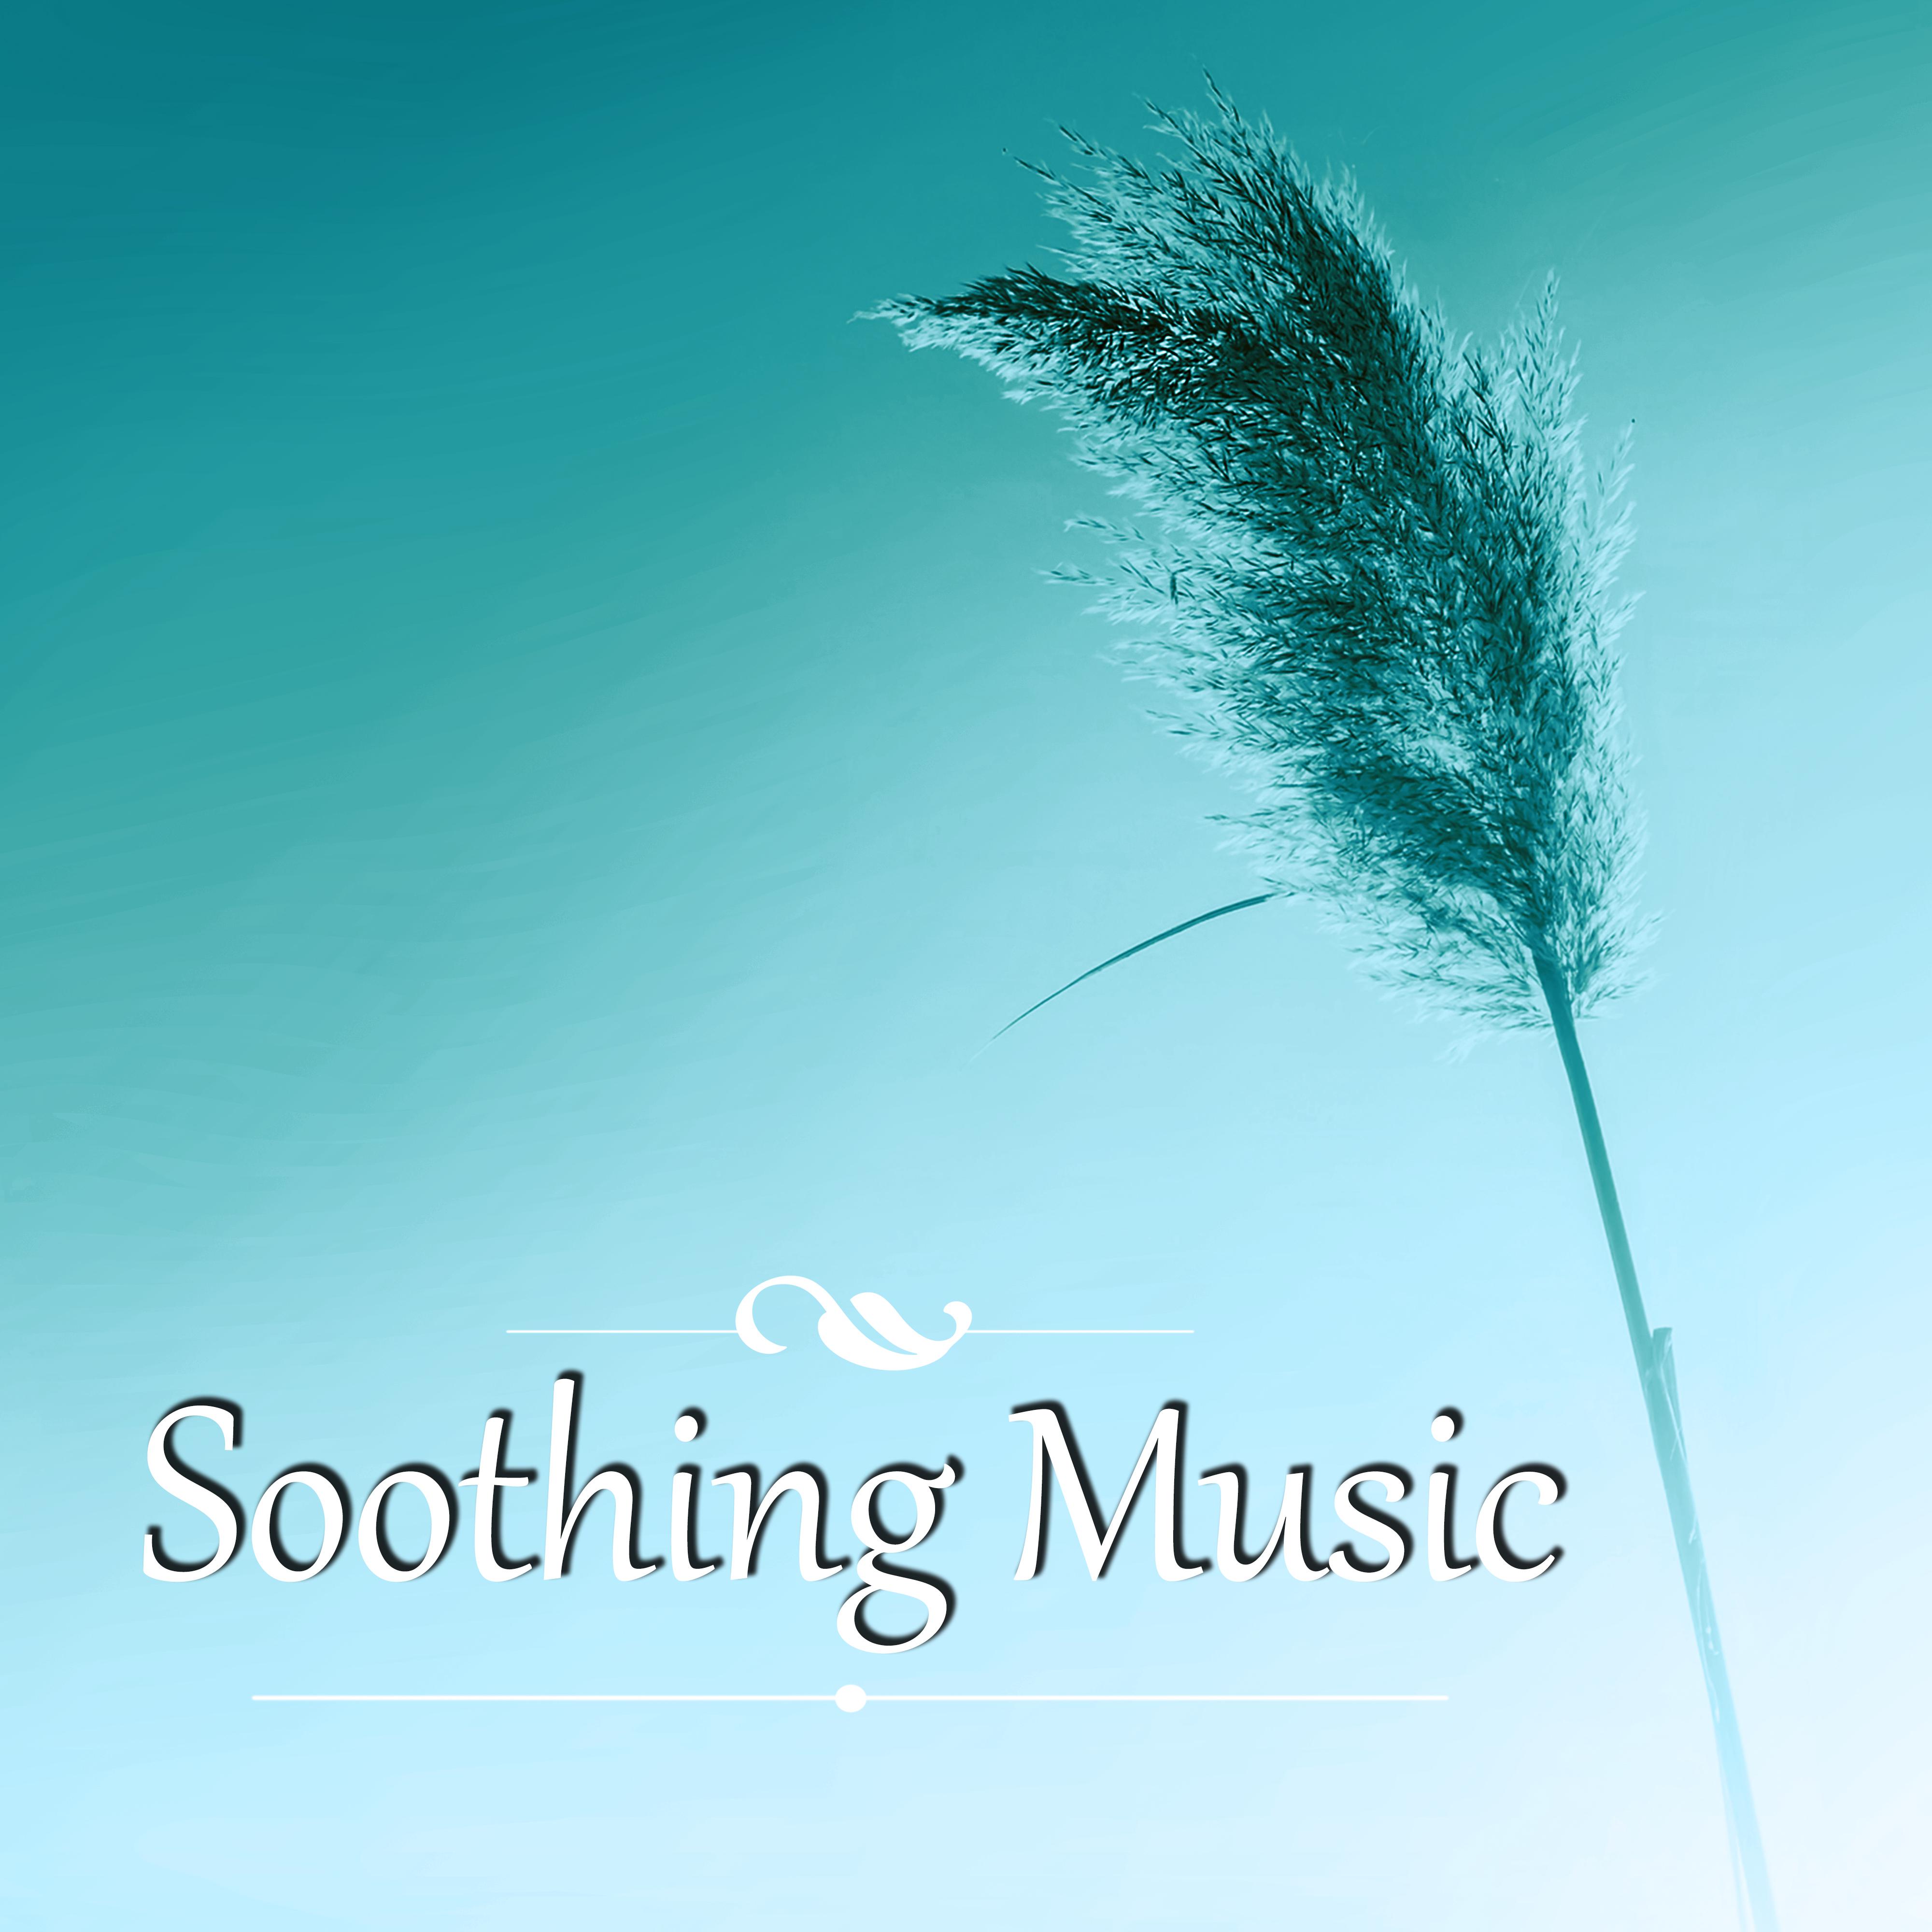 Soothing Music - Luxury Home Spa Lounge, Sensual Massage Music for Aromatherapy, Ultimate Music for Relax, Mind Body Relaxation, Nature Music for Healing Through Sound and Touch